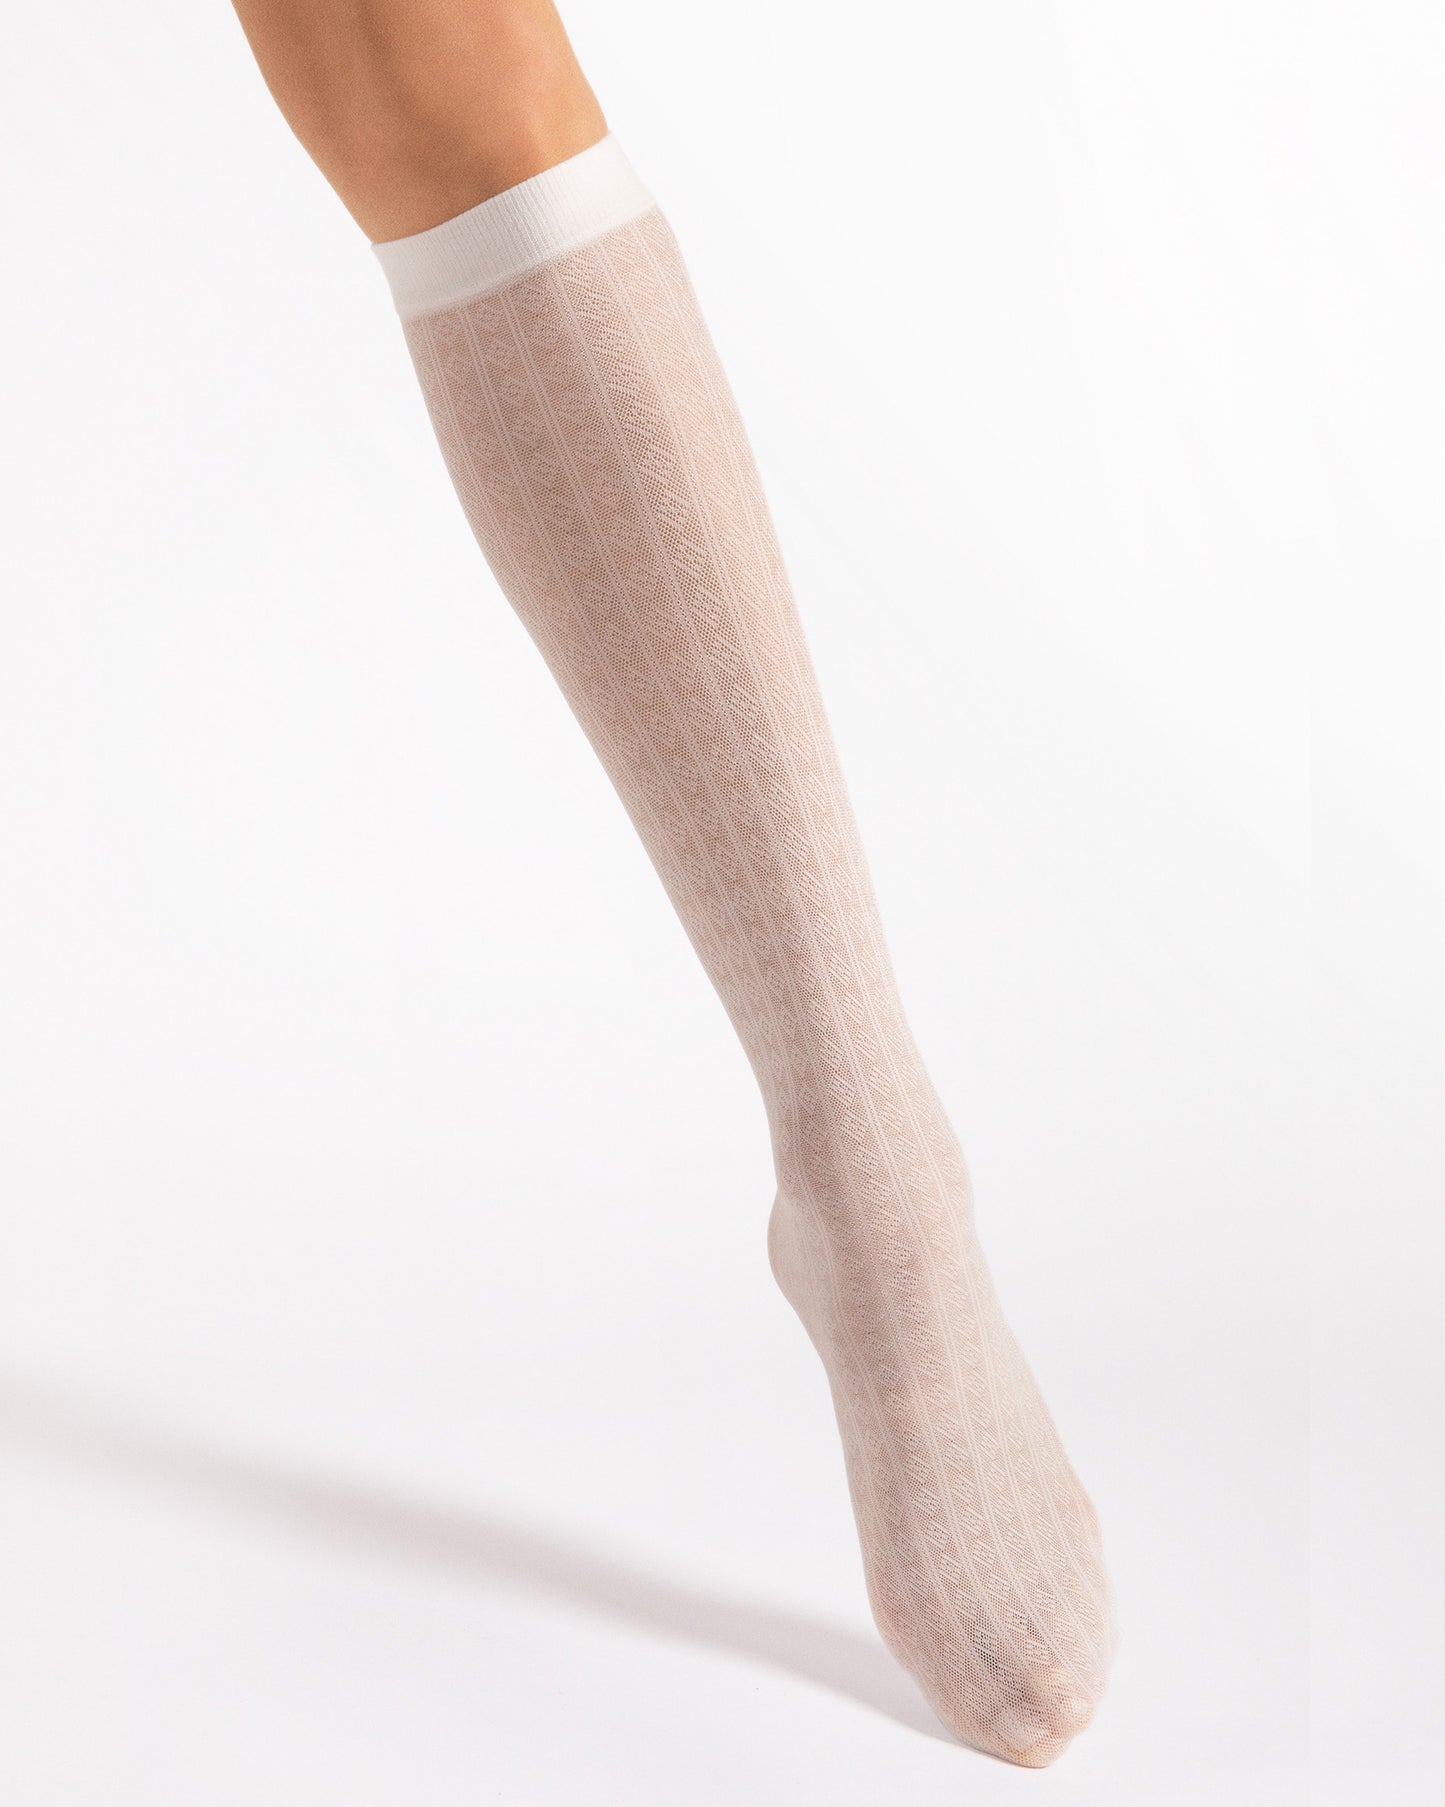 Fiore Diamond Crush 30 Den - Off white semi-sheer micro mesh fashion knee-high socks with a vertical stripe and linear diamond style pattern and plain elasticated cuff.